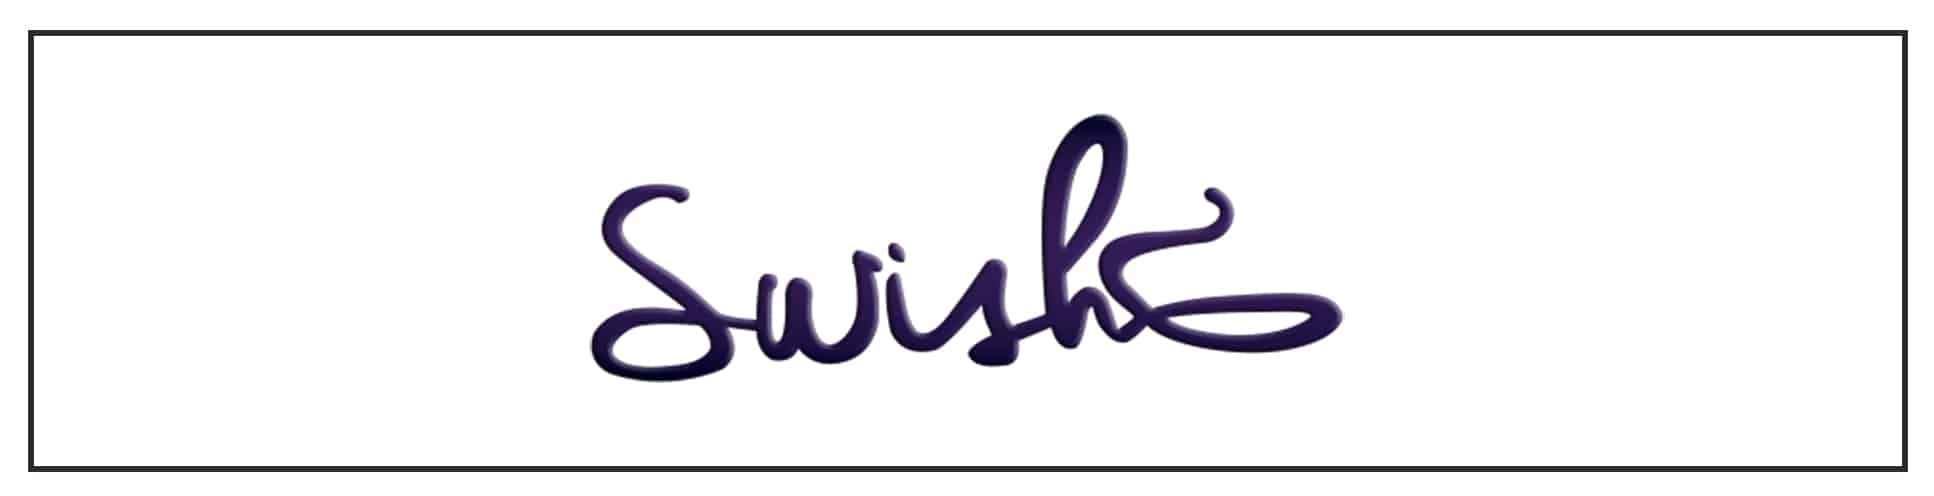 A purple logo with the word'switch'on it.